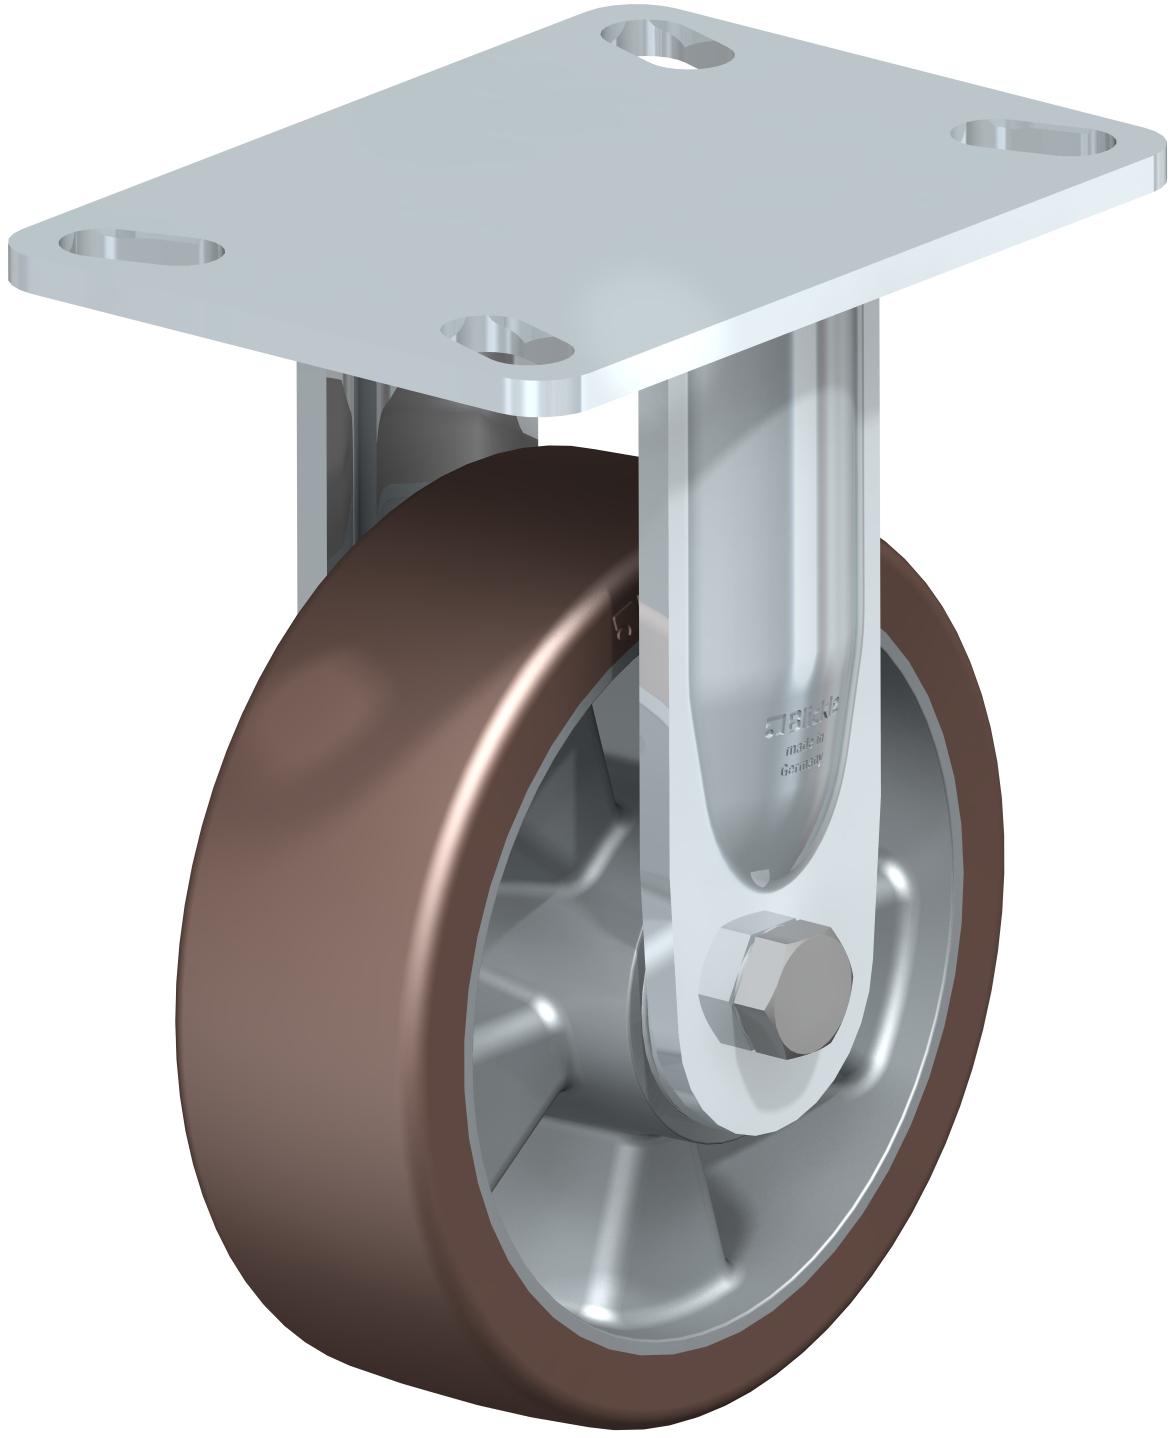 Heavy Duty Industrial Large Top Plate Casters -Rigid, Ball Bearing, Blickle Besthane Brown Polyurethane Tread On Aluminum Core Wheel